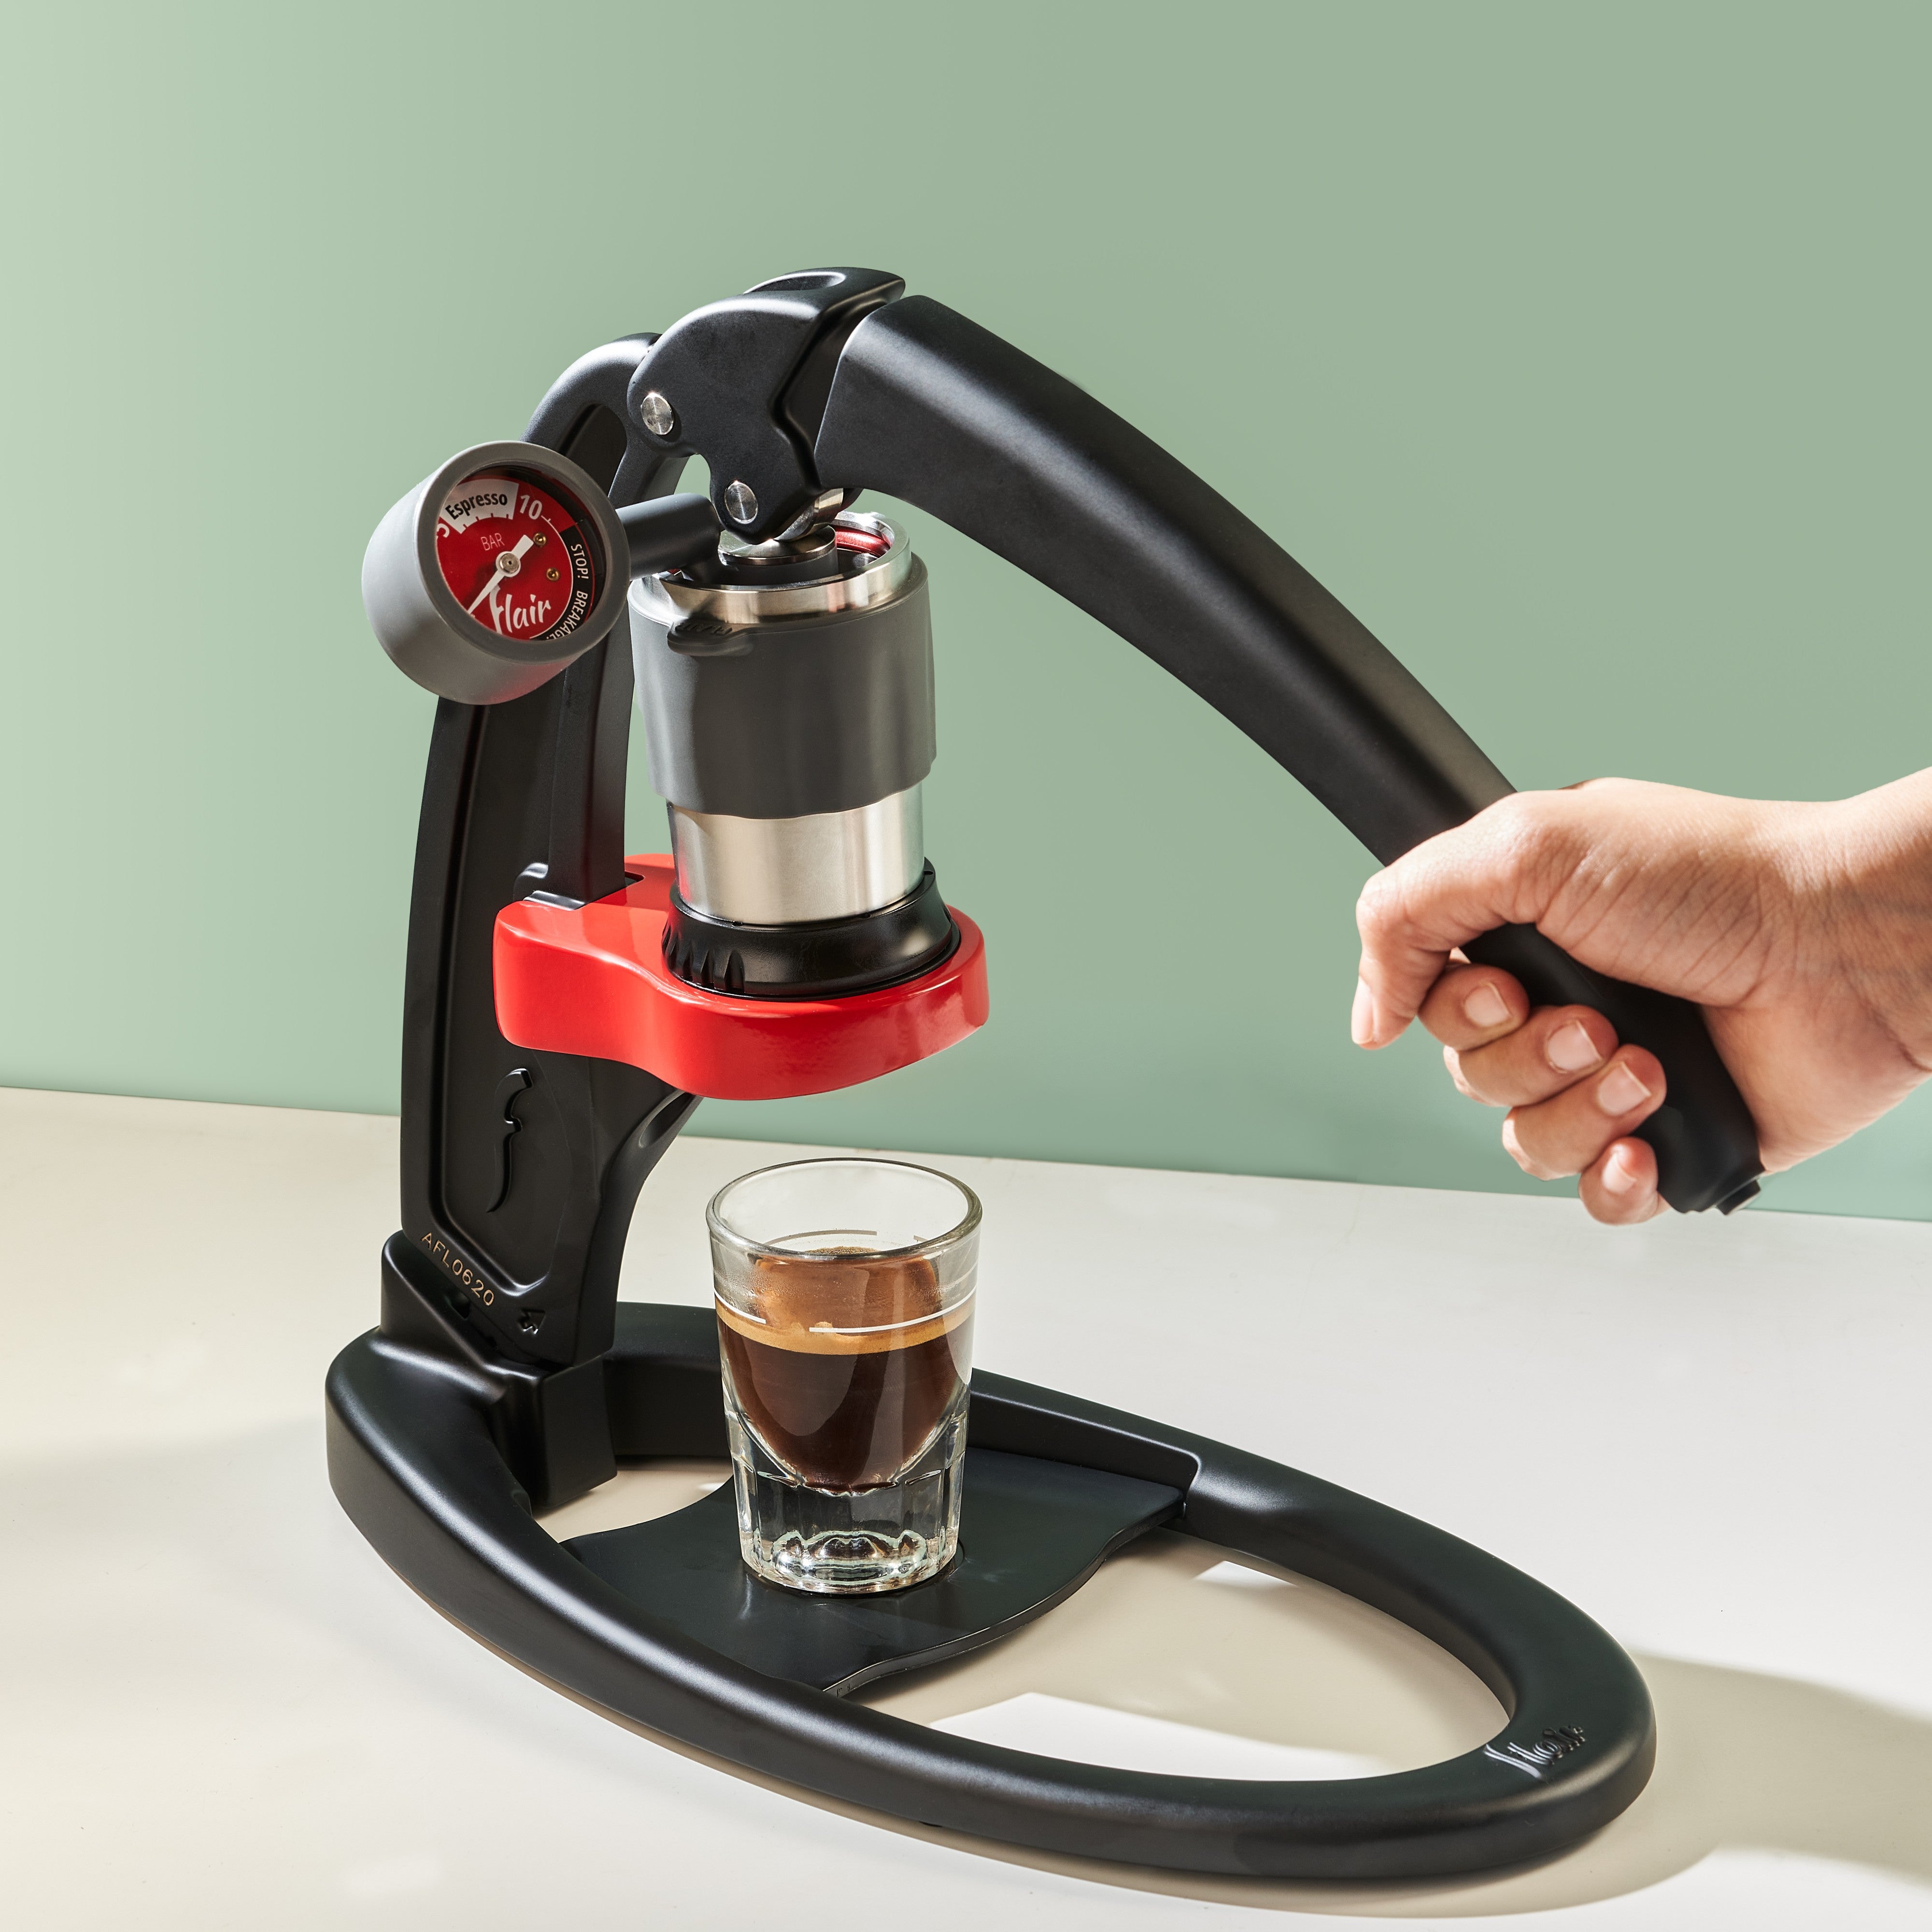 Flair Espresso Maker CLASSIC with Pressure Gauge Kit